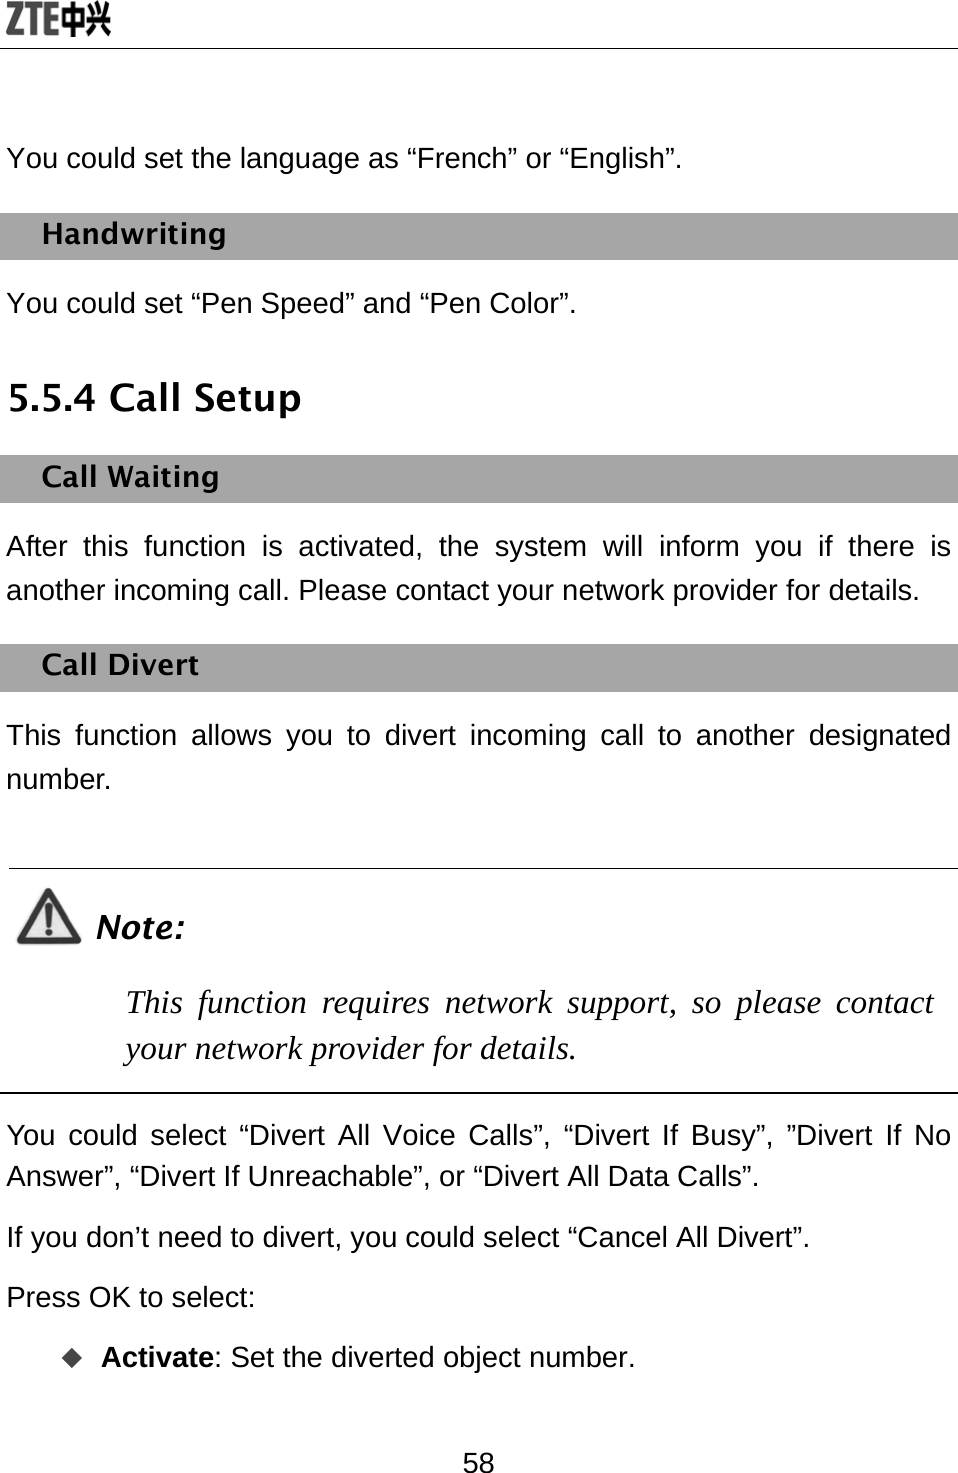  58 You could set the language as “French” or “English”. Handwriting You could set “Pen Speed” and “Pen Color”. 5.5.4 Call Setup Call Waiting After this function is activated, the system will inform you if there is another incoming call. Please contact your network provider for details. Call Divert This function allows you to divert incoming call to another designated number.  Note: This function requires network support, so please contact your network provider for details.  You could select “Divert All Voice Calls”, “Divert If Busy”, ”Divert If No Answer”, “Divert If Unreachable”, or “Divert All Data Calls”.   If you don’t need to divert, you could select “Cancel All Divert”. Press OK to select:  Activate: Set the diverted object number. 